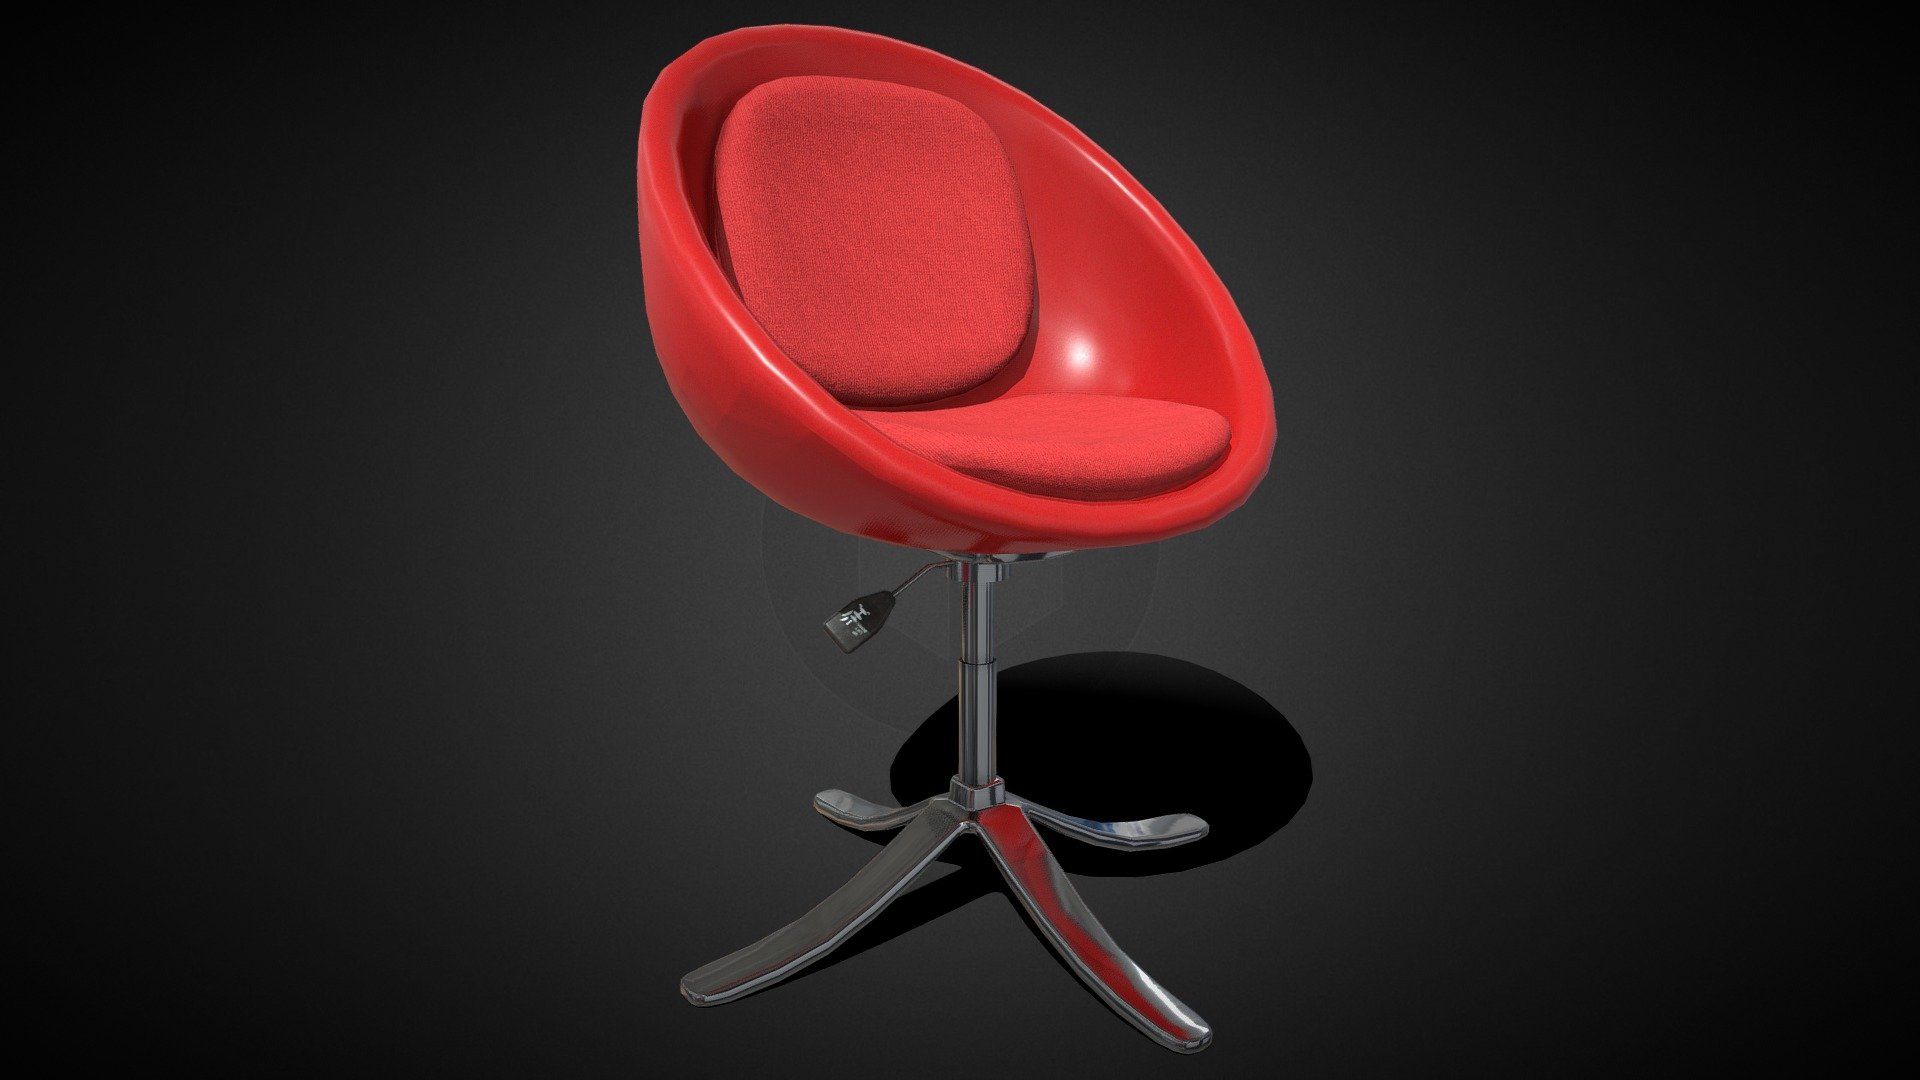 Free downlodable lowpoly 3d Height Adjustable Swivel Chair.

This model can also be used as -
- Lounge Chair
- Fiber Chair
- Bar Chair
- Office Chair
- Home Chair
- Height Adjustable Chair
- Swivel Chair
- Red Colour / color chair 
- Game ready lowpoly model and ready to use in your scene.

Model have Triangles: 3.1k, Vertices: 1.7k

Thanks 3d model